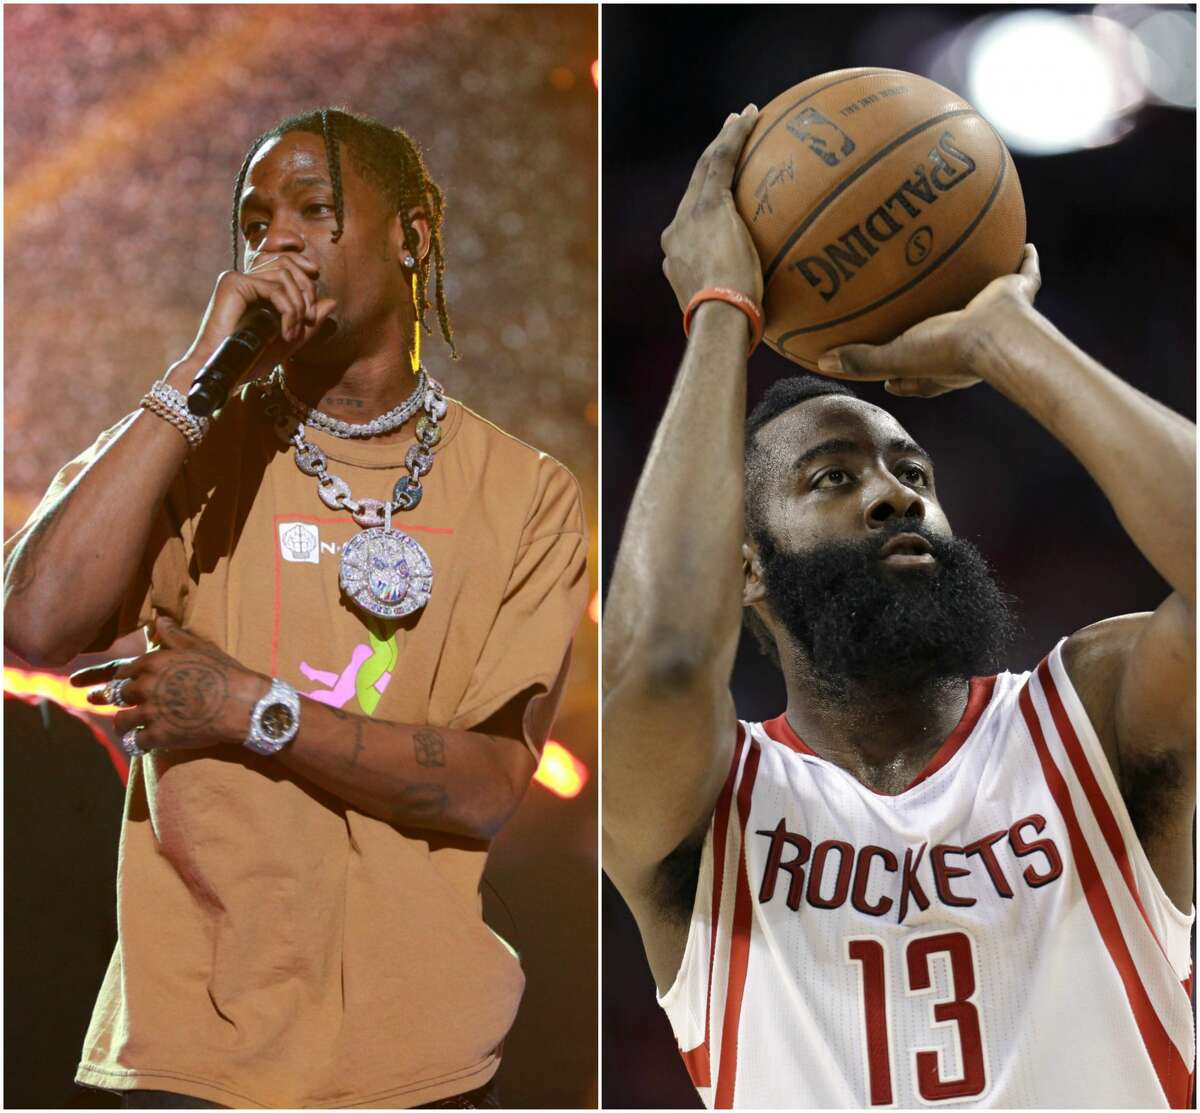 Way Back Travis Scott 2017 "I need fake n----- to get way back; James Harden with the range on me n---- way back." LISTEN HERE